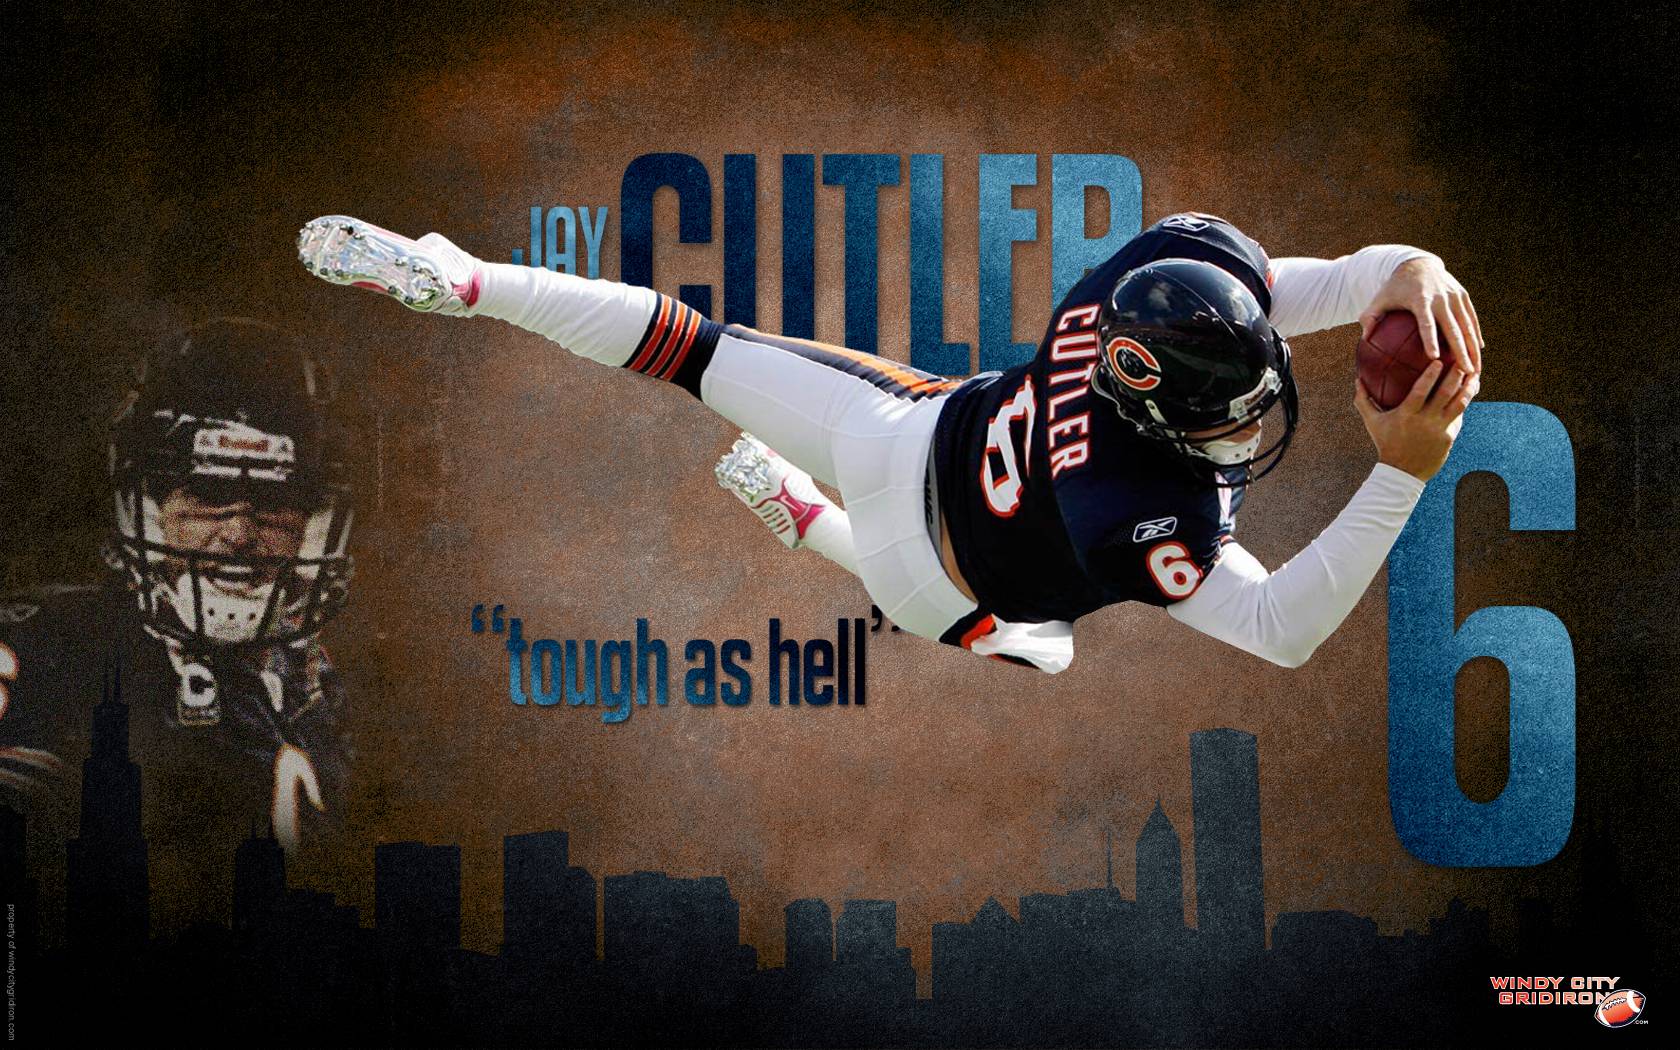 Free Chicago Bears wallpaper background image. Chicago Bears